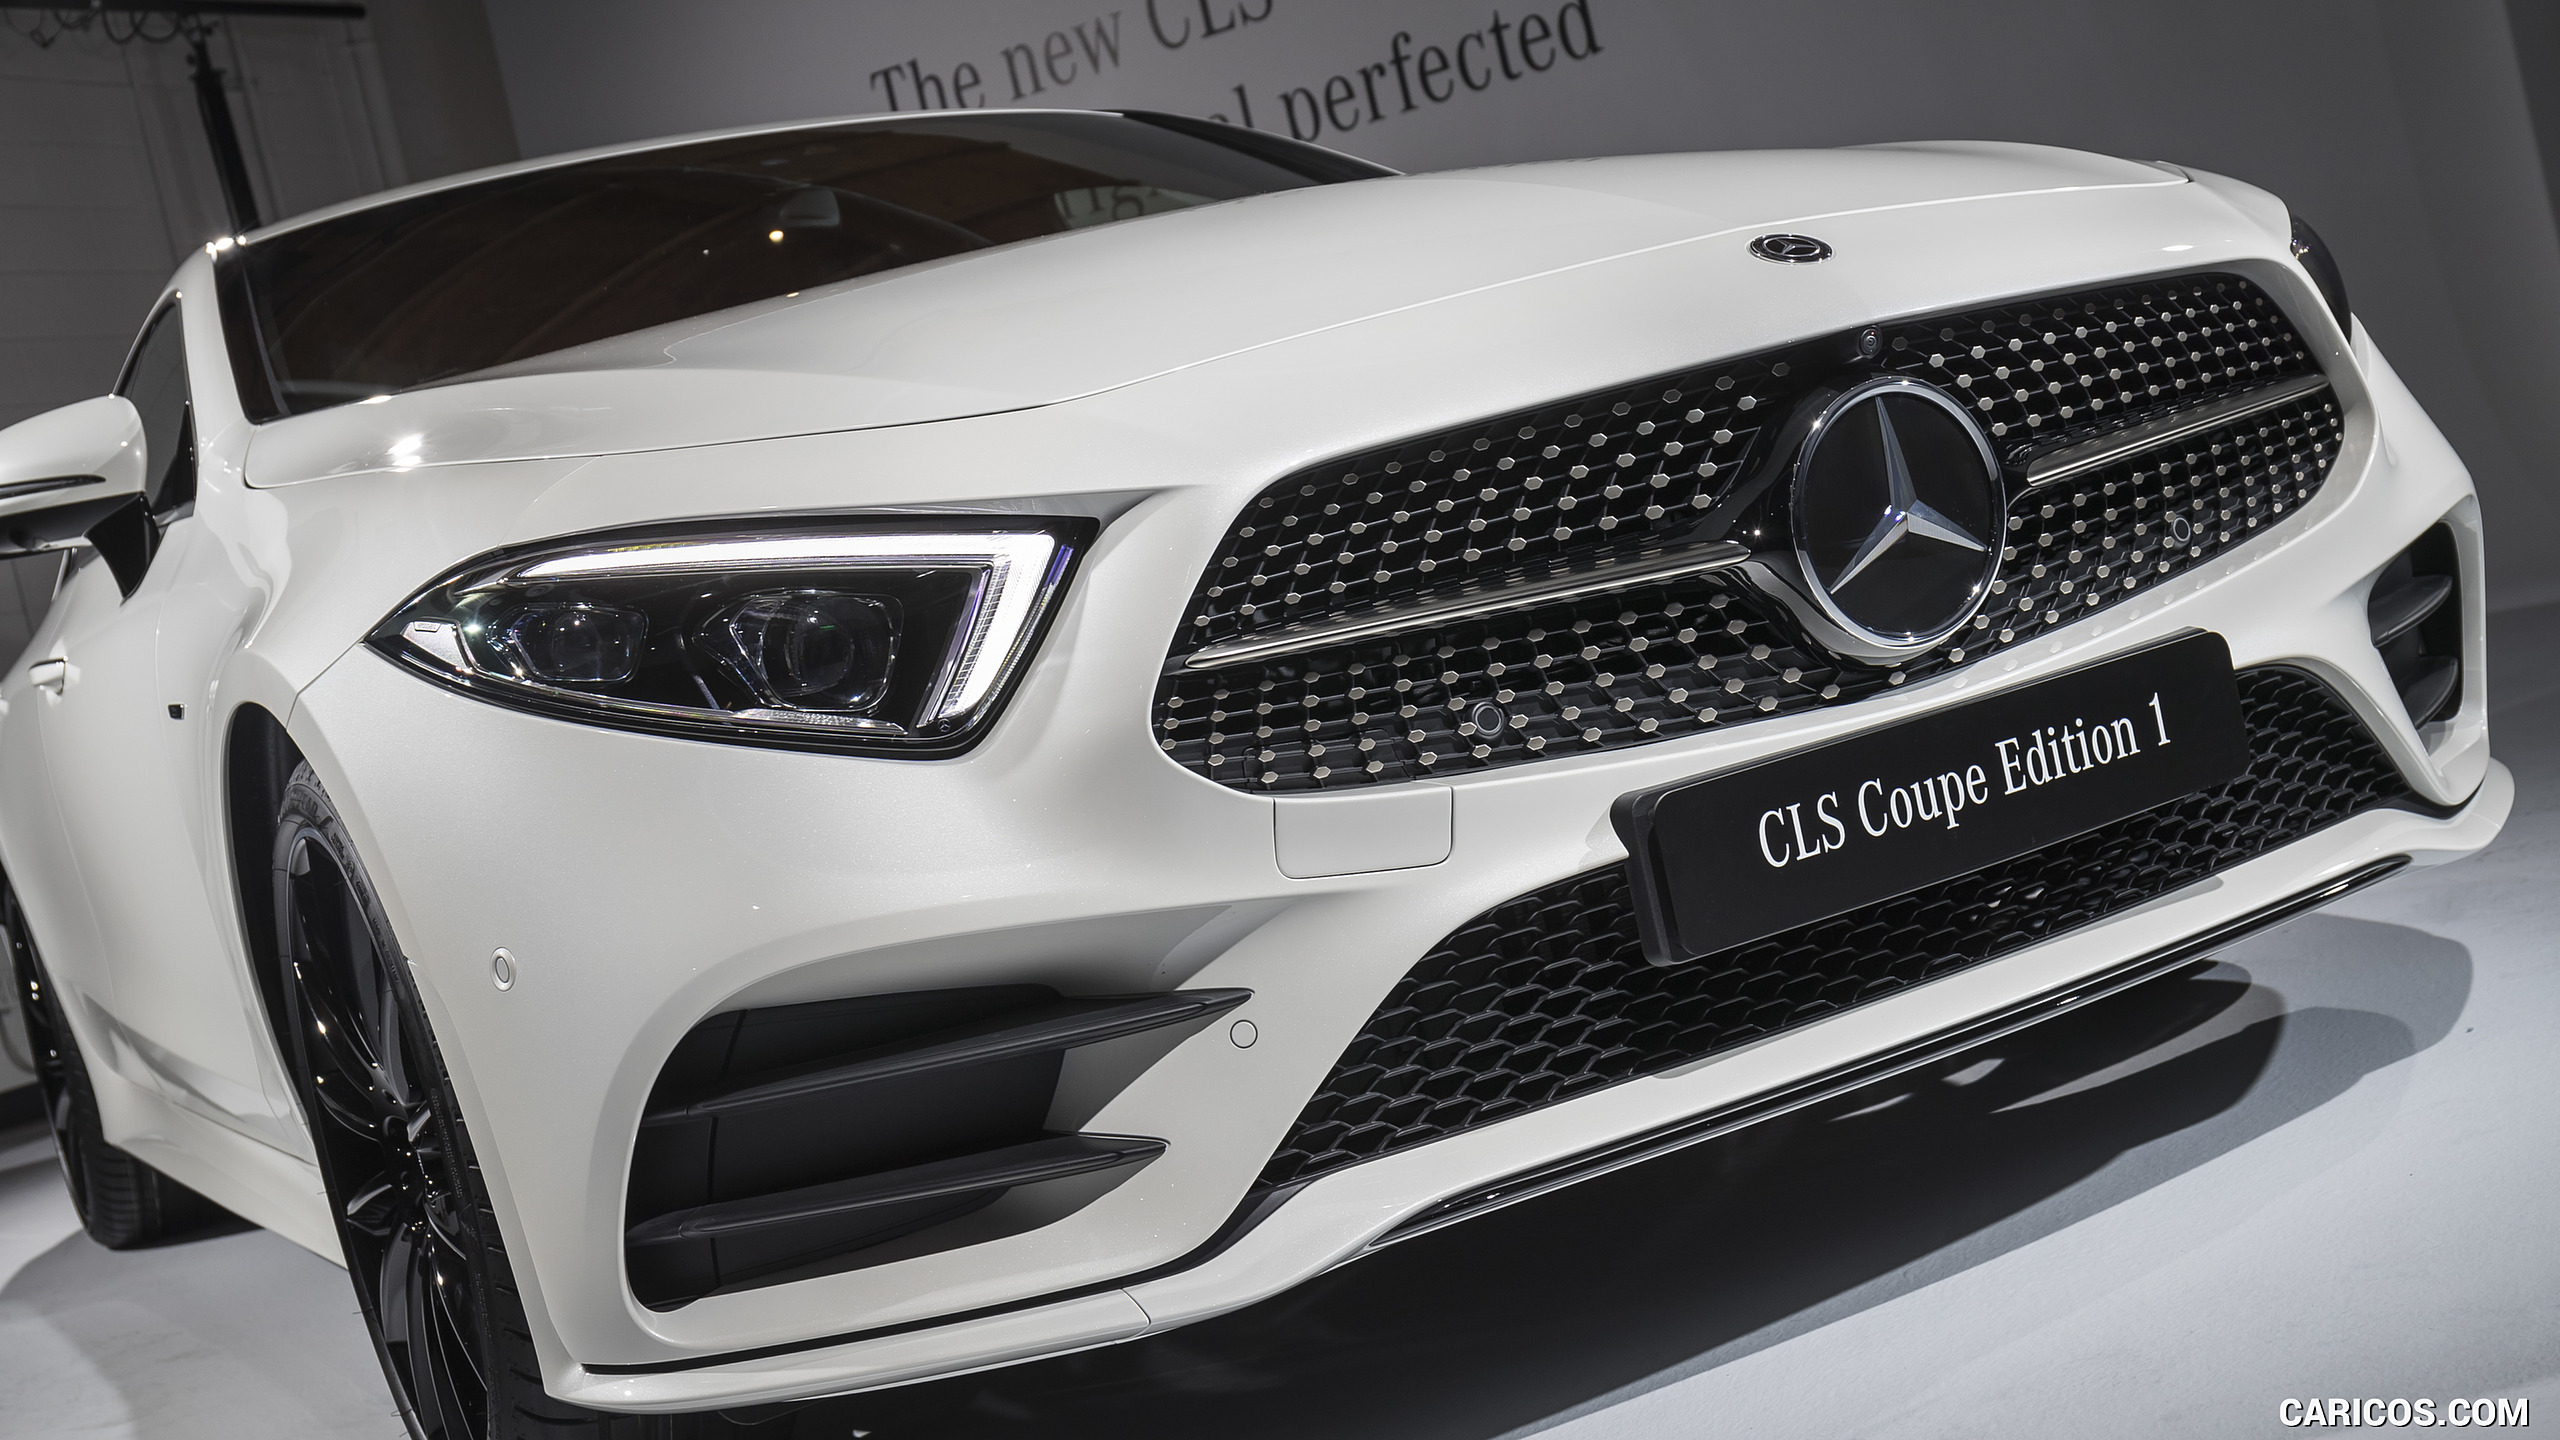 2019 Mercedes-Benz CLS Edition 1 - Grille, #59 of 231